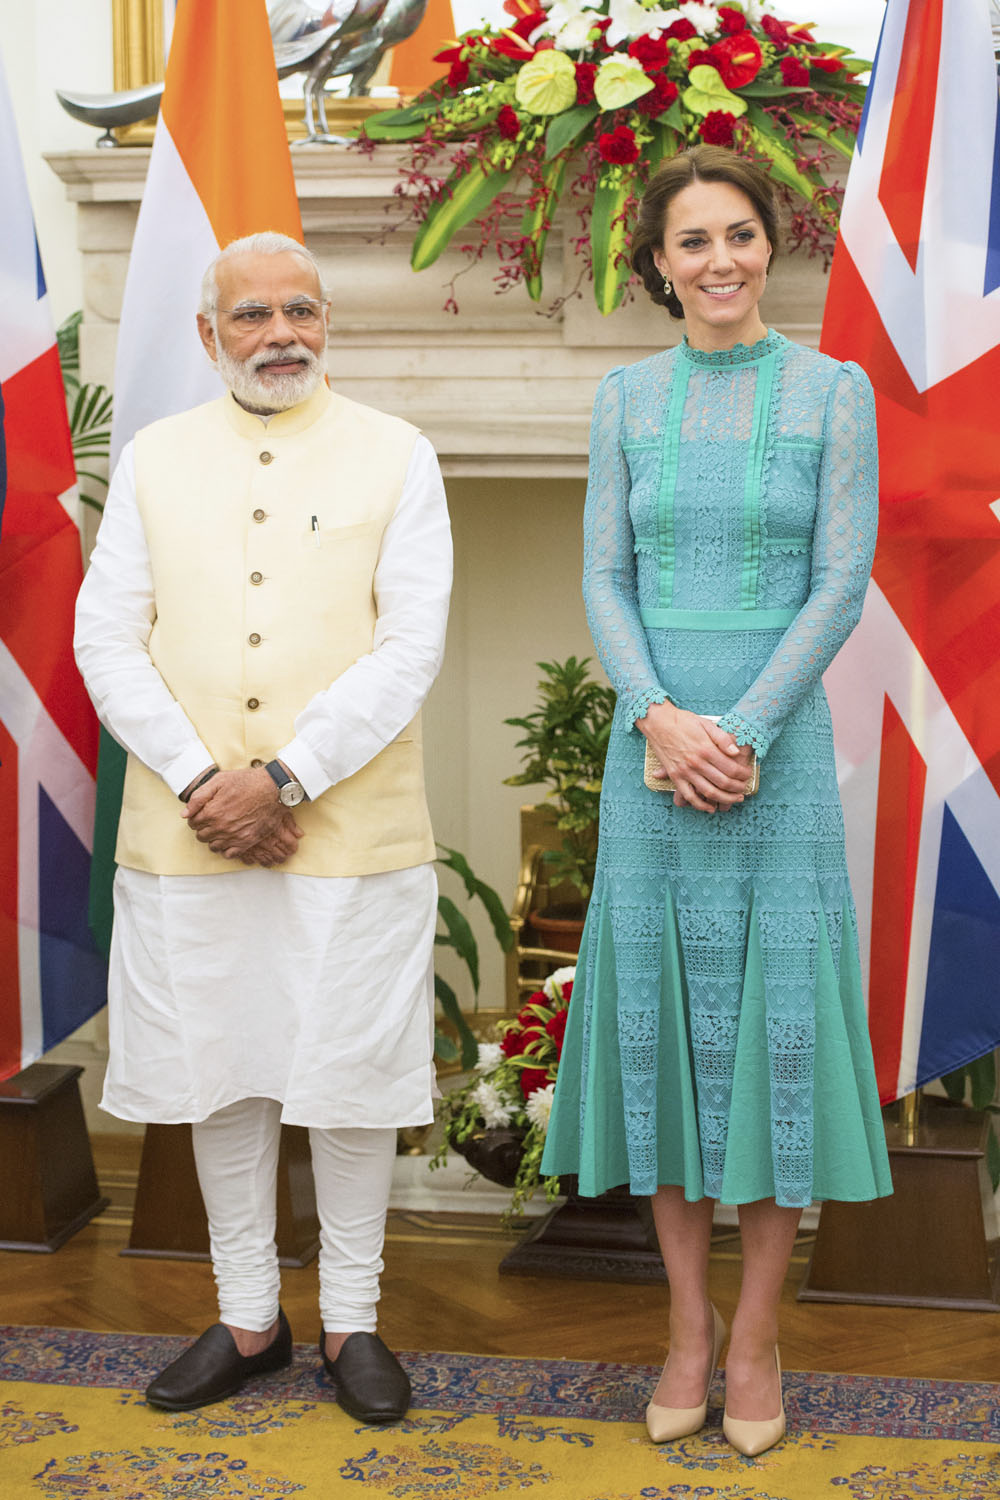 Kate chose to wear British designer Alice Temperely for a second time, wearing a green lace dress while meeting the Prime Minister Narendra Modi.